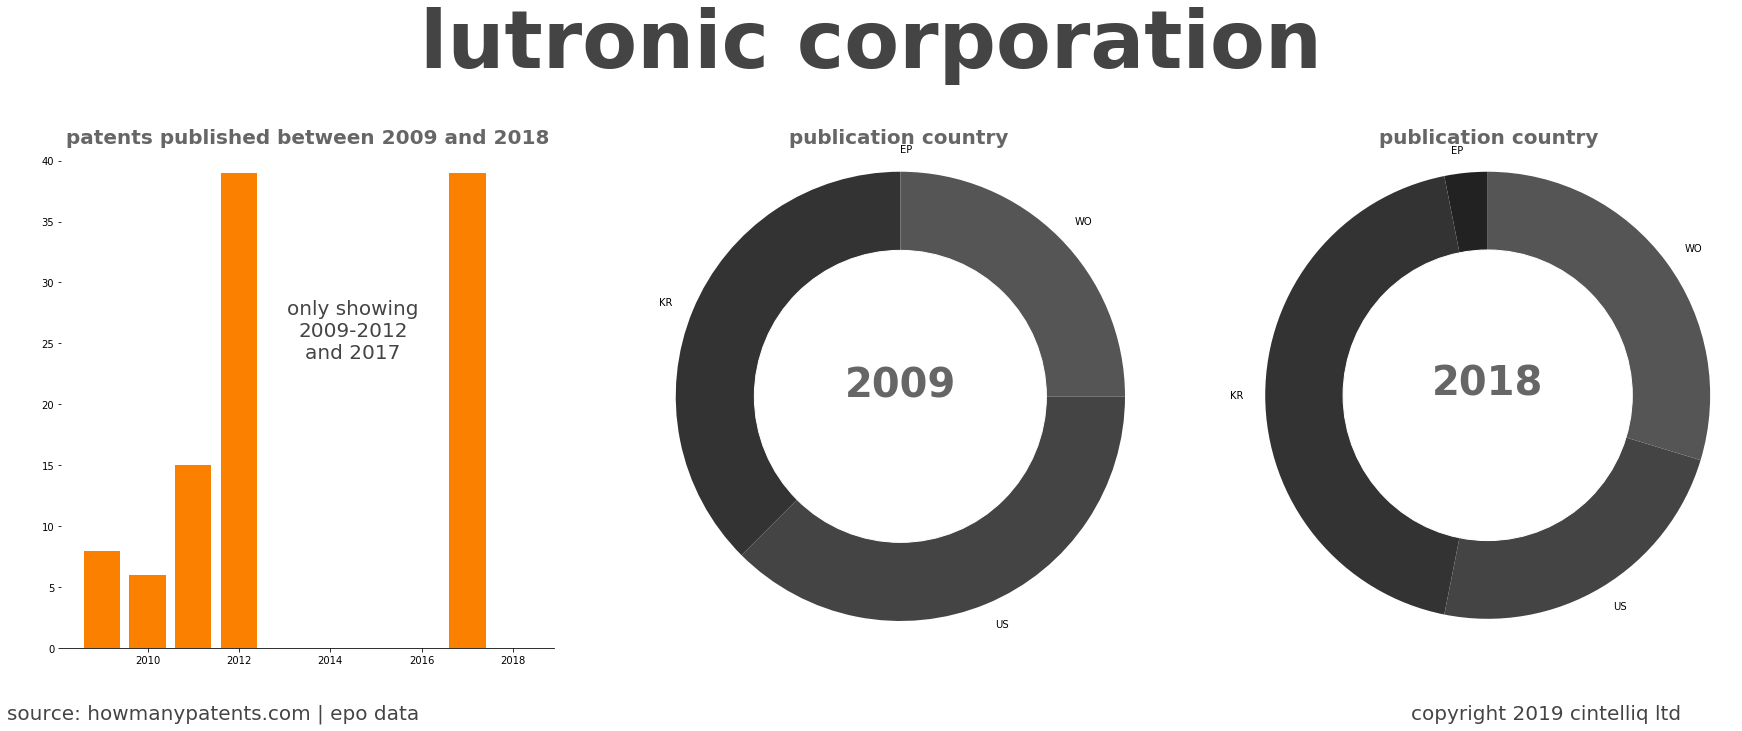 summary of patents for Lutronic Corporation